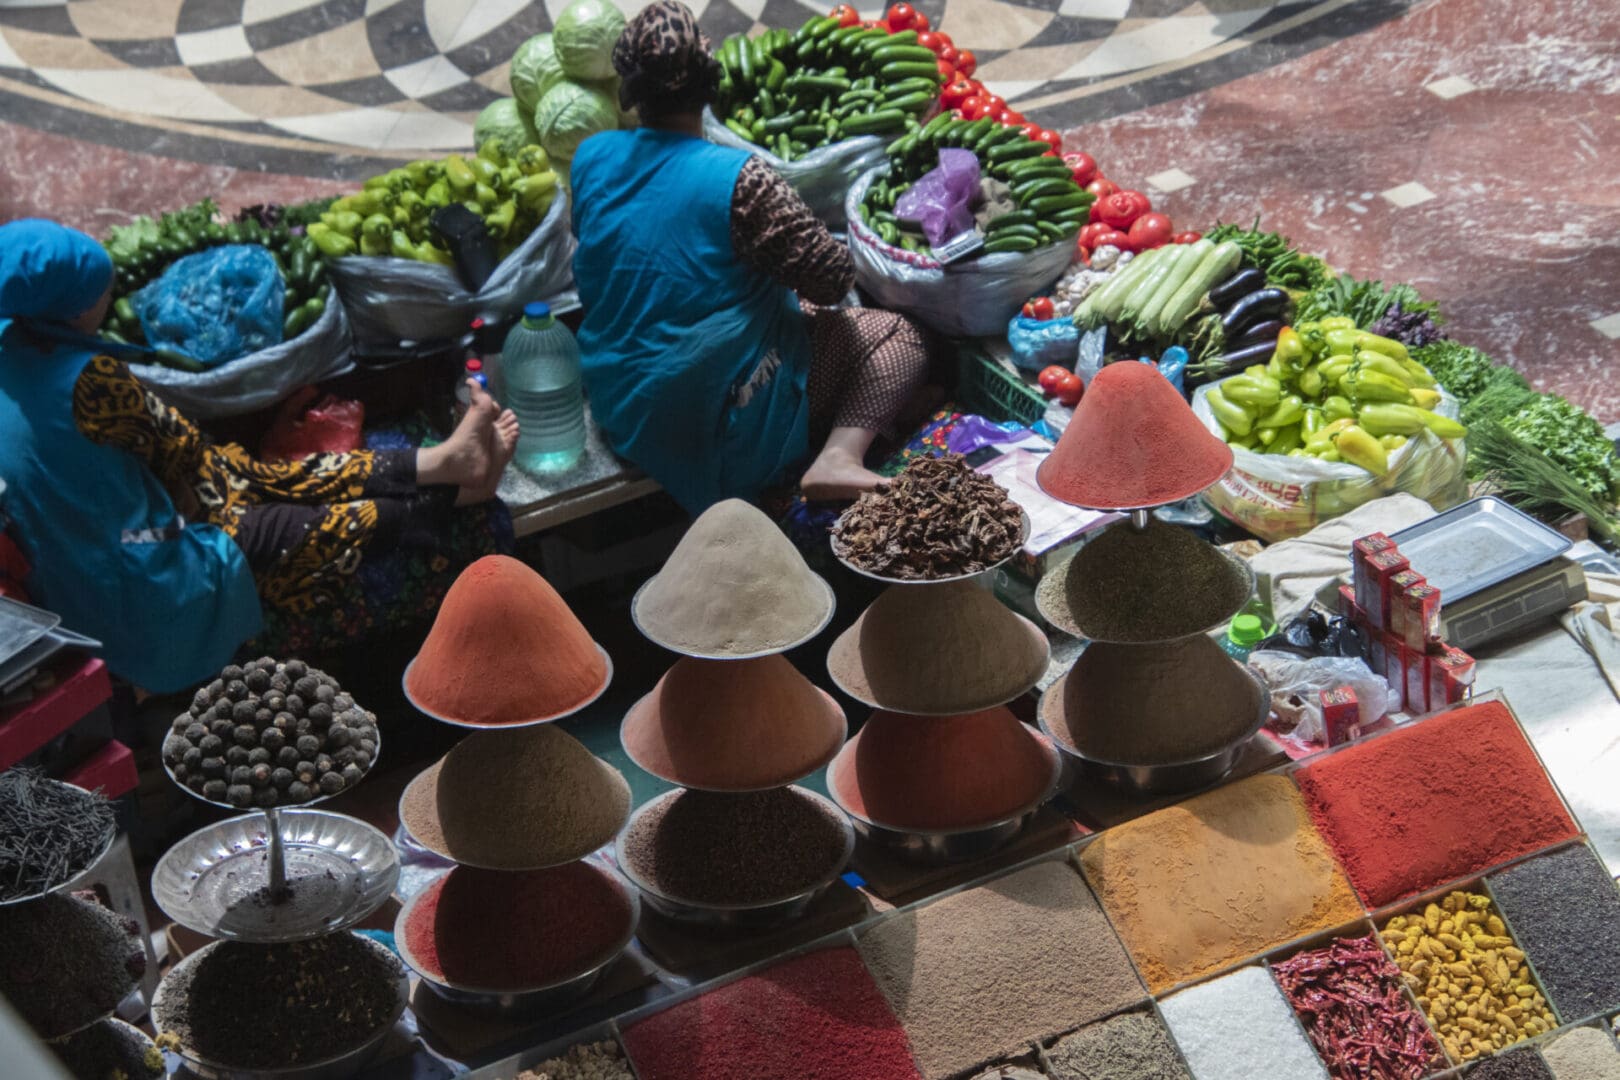 A woman sells spices in a market in morocco.